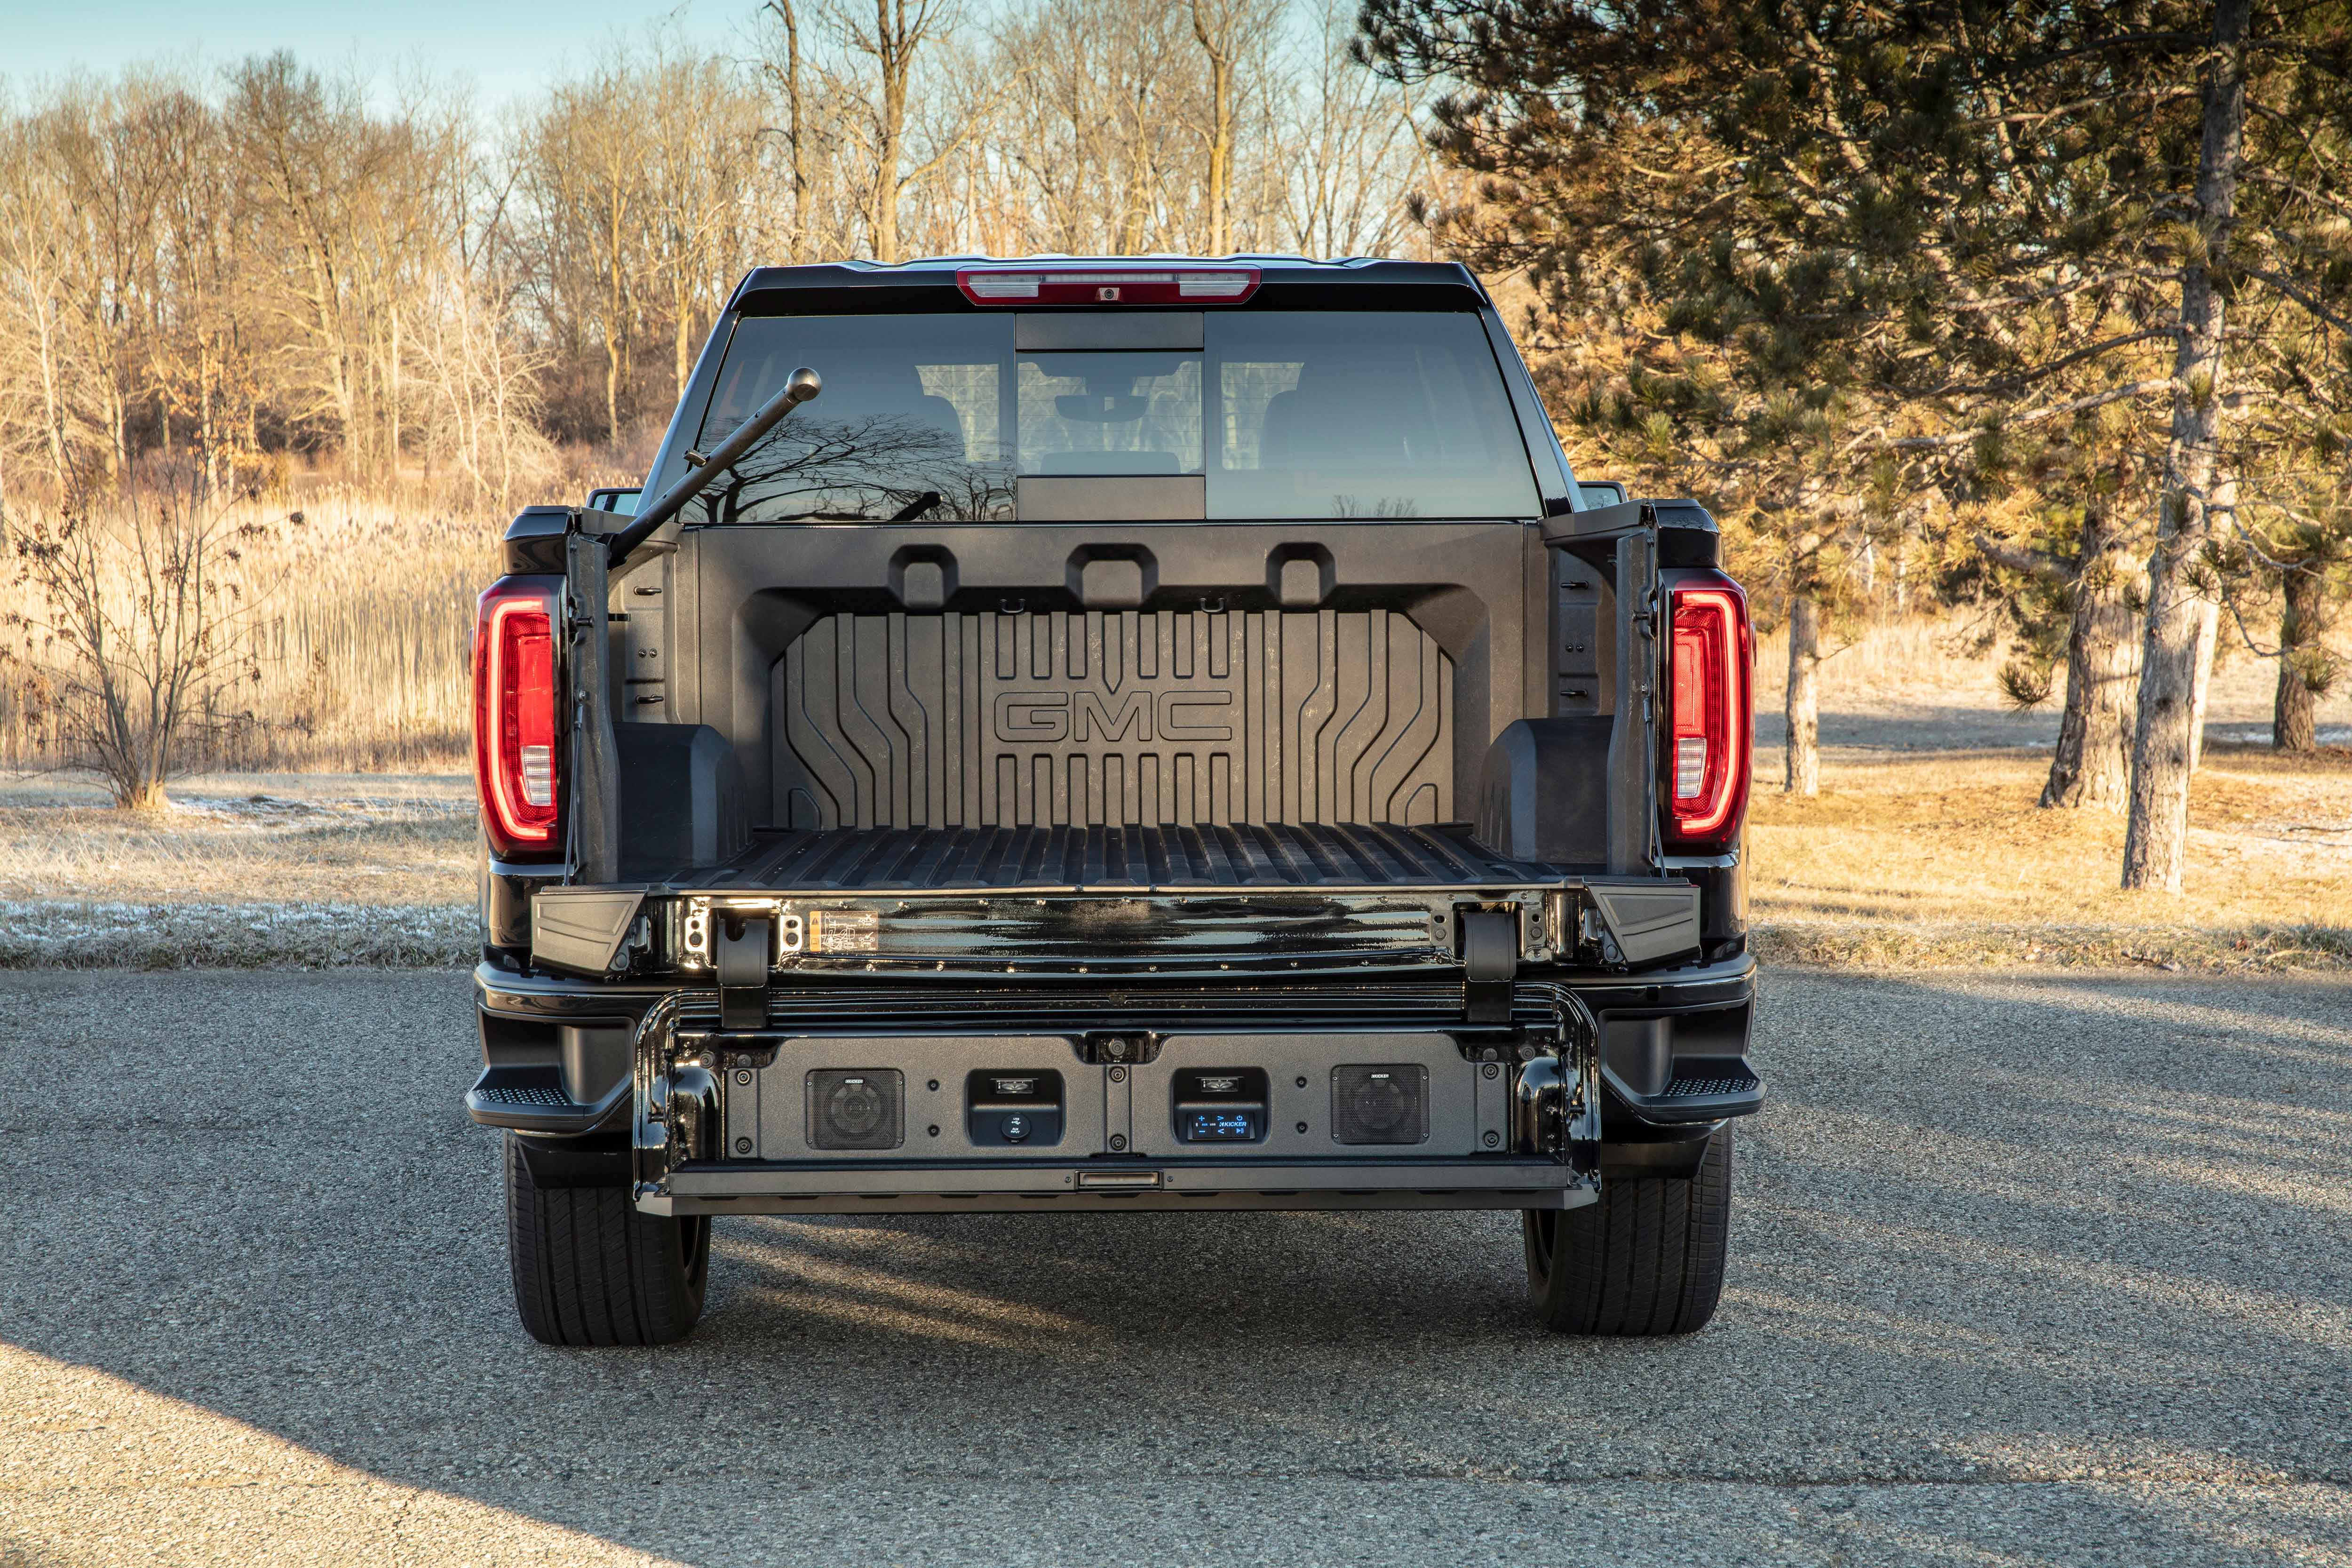 GMC CarbonProTM Delivers Innovation and Durability Where It Counts